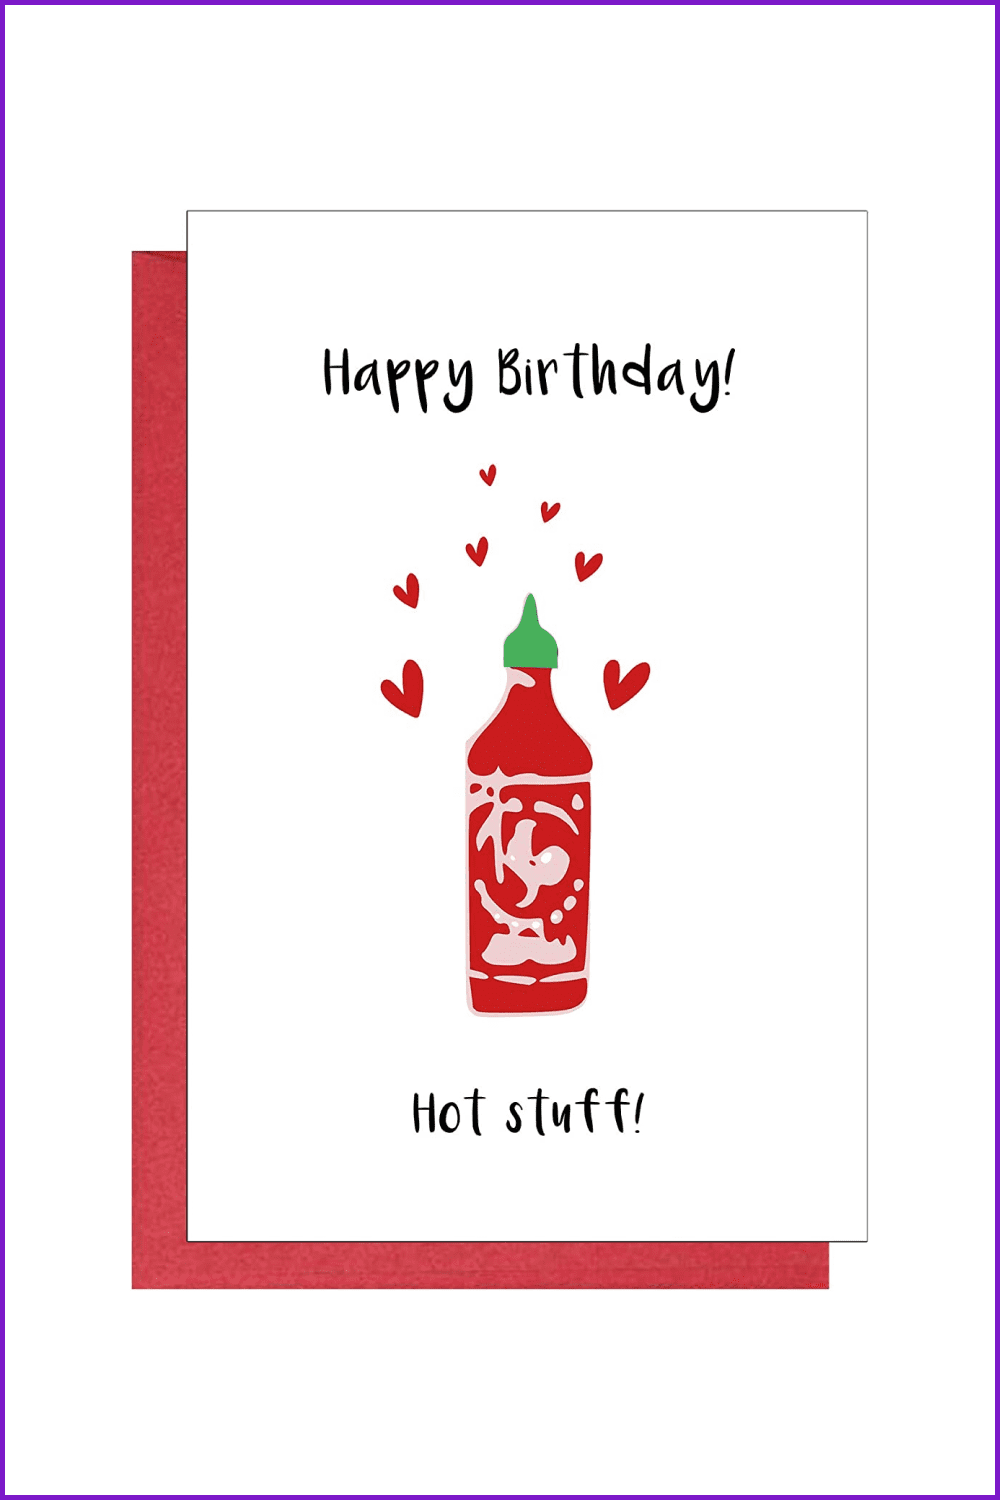 Birthday card with painted red bottle of pepper.